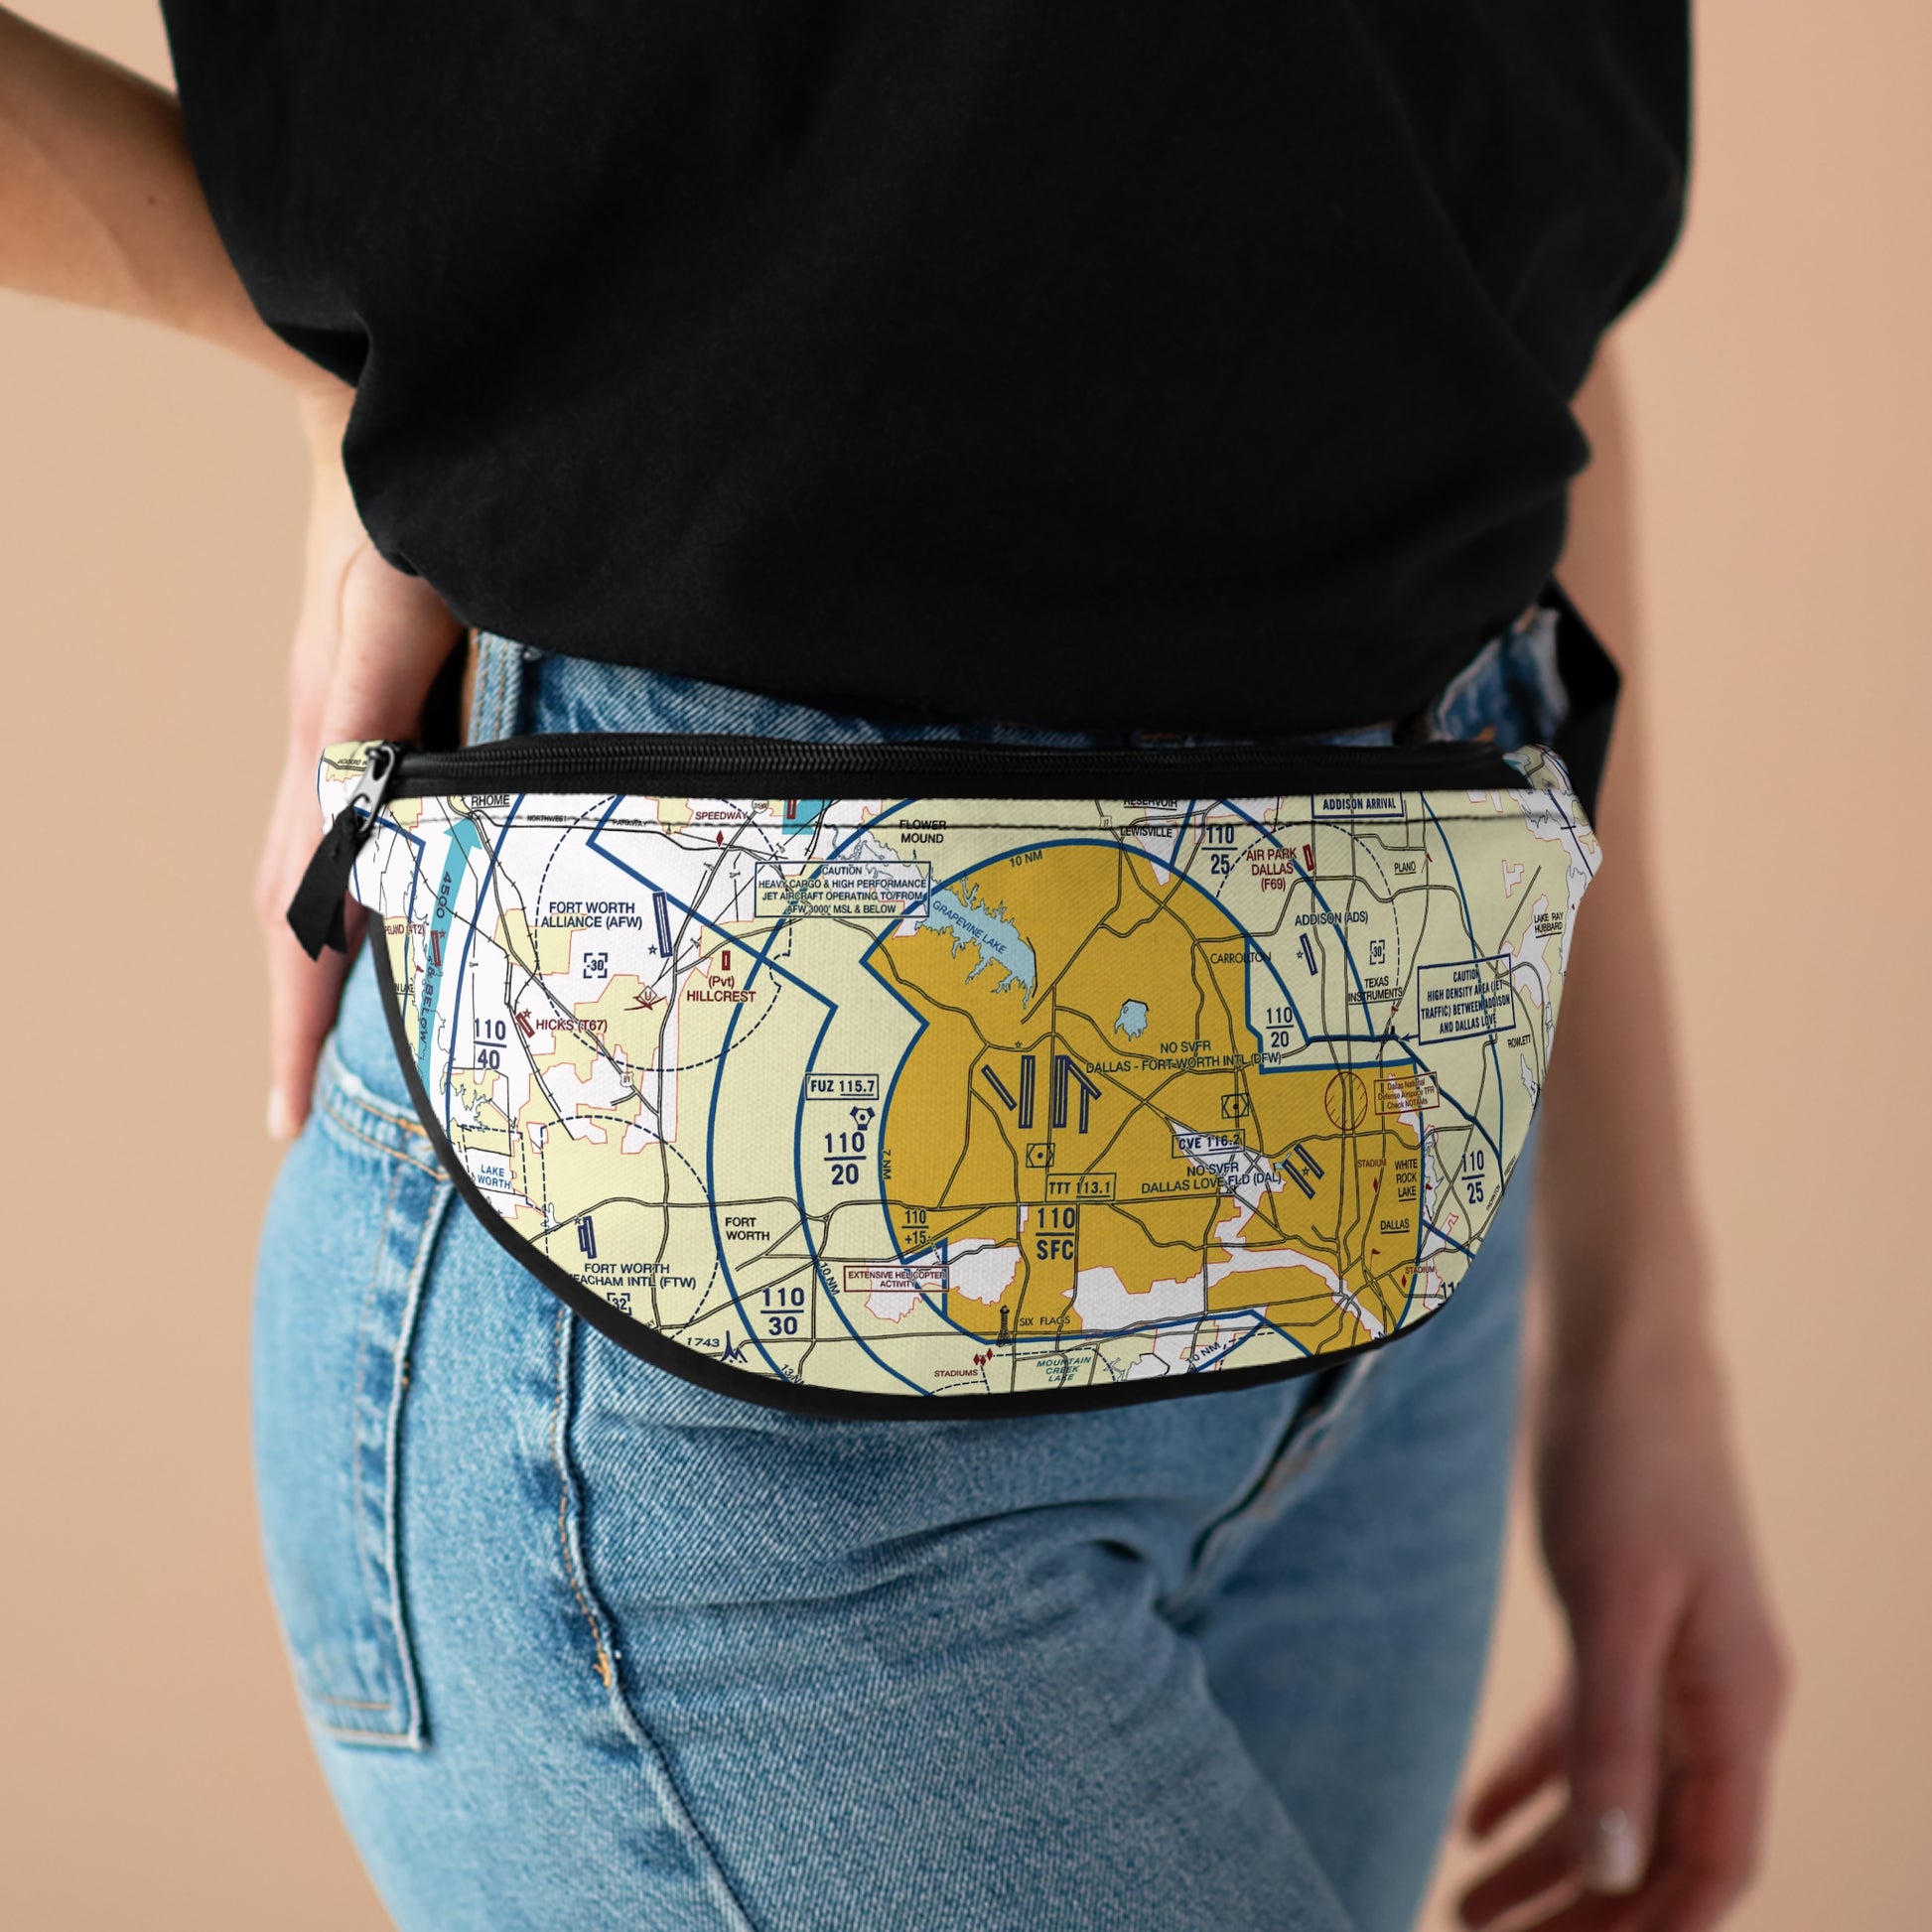 Dallas - Ft. Worth Flyway fanny pack